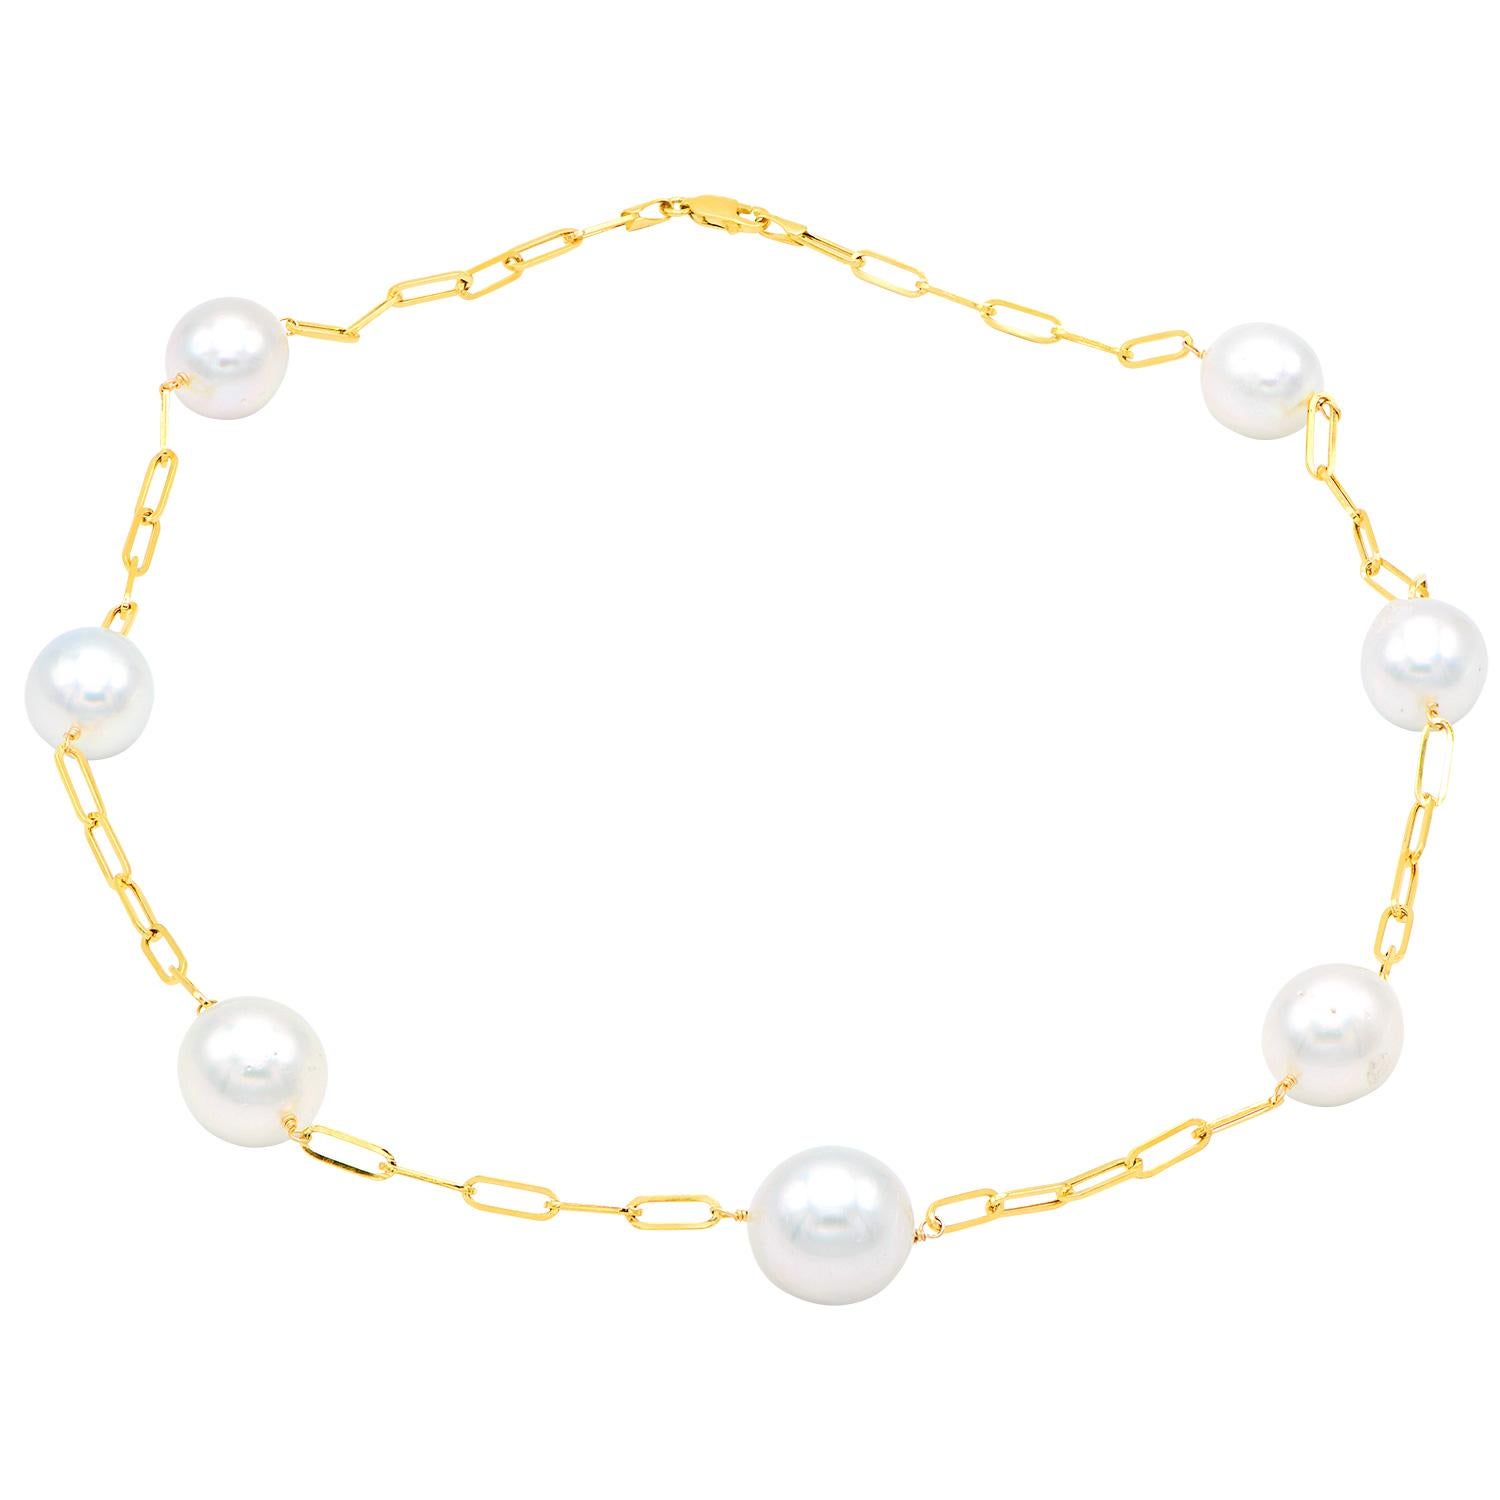 This beautiful necklace is made of 14 karat yellow gold paperclip links with 7, 12-15mm White South Sea pearls throughout. The necklace totals 18 inches long and has AA+ quality pearls. 